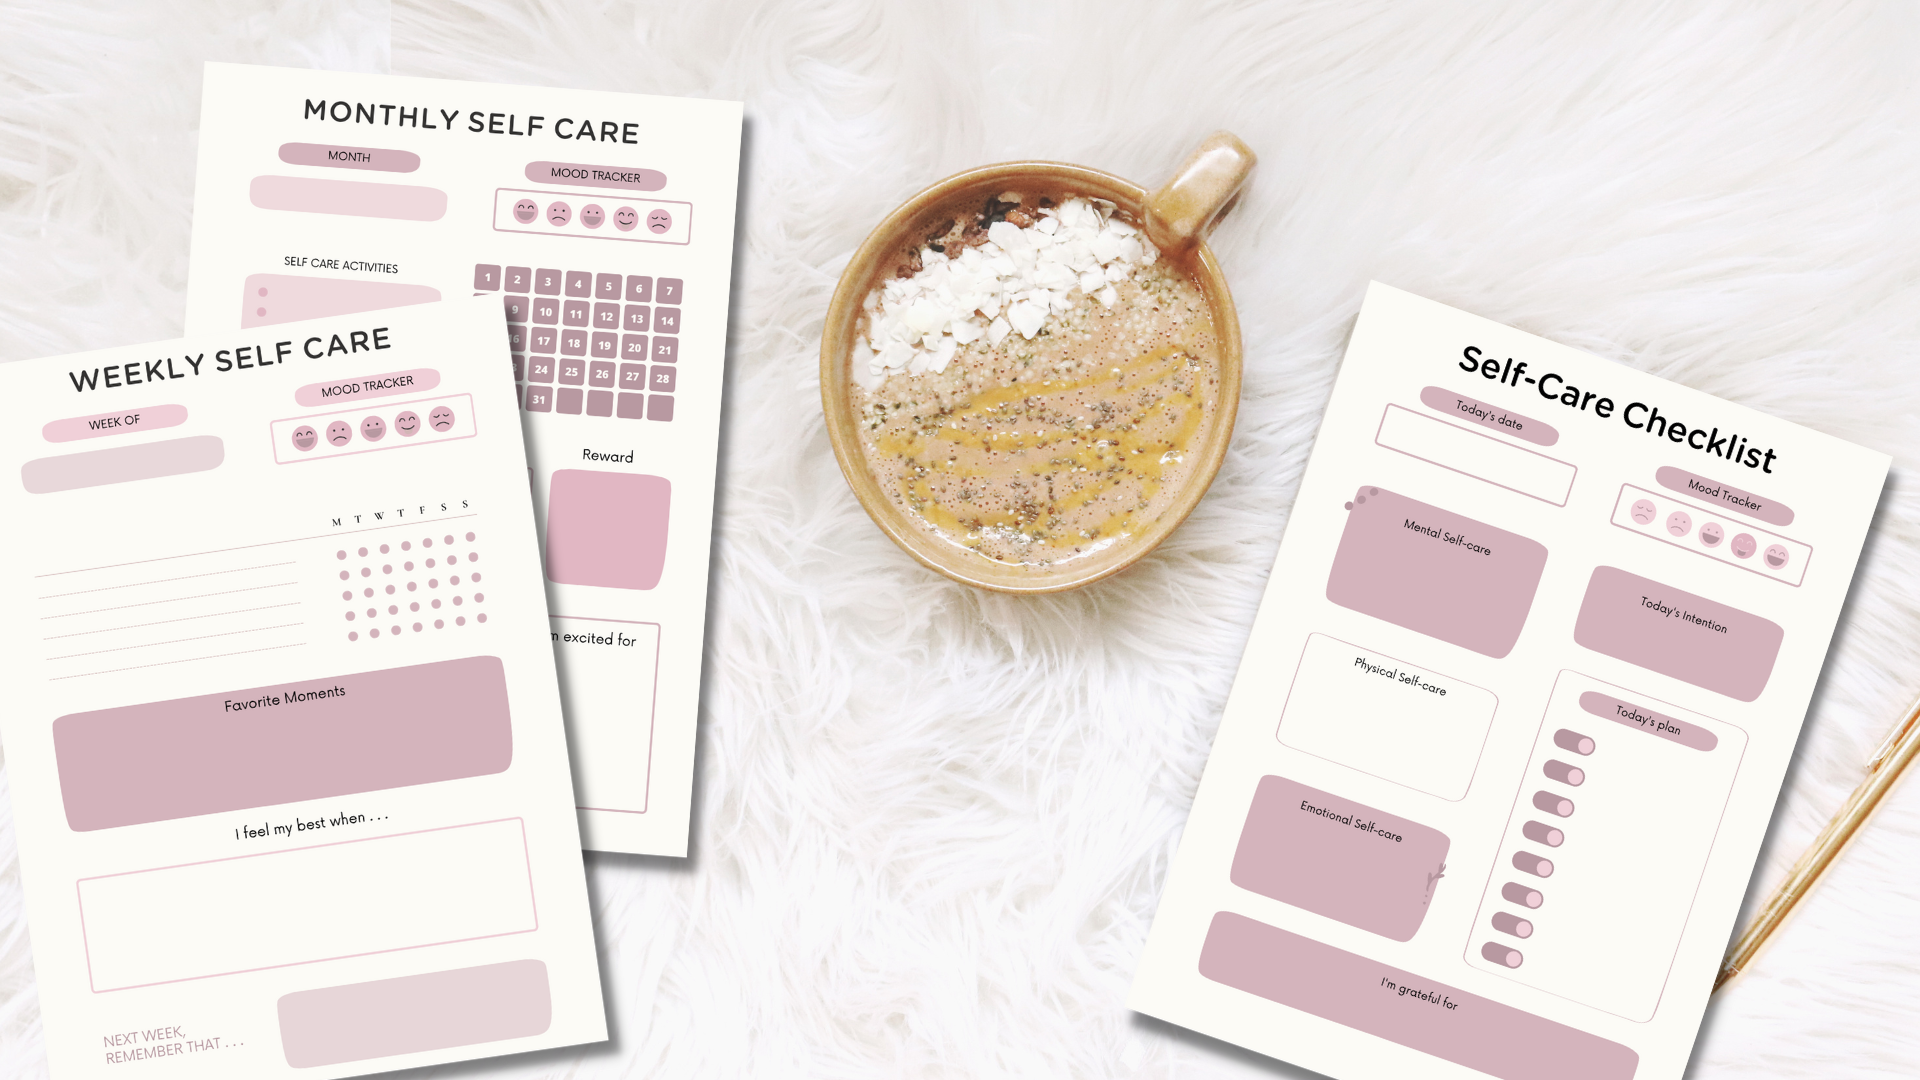 Ultimate Daily, Monthly & Weekly Self Care Checklist To Swear By!